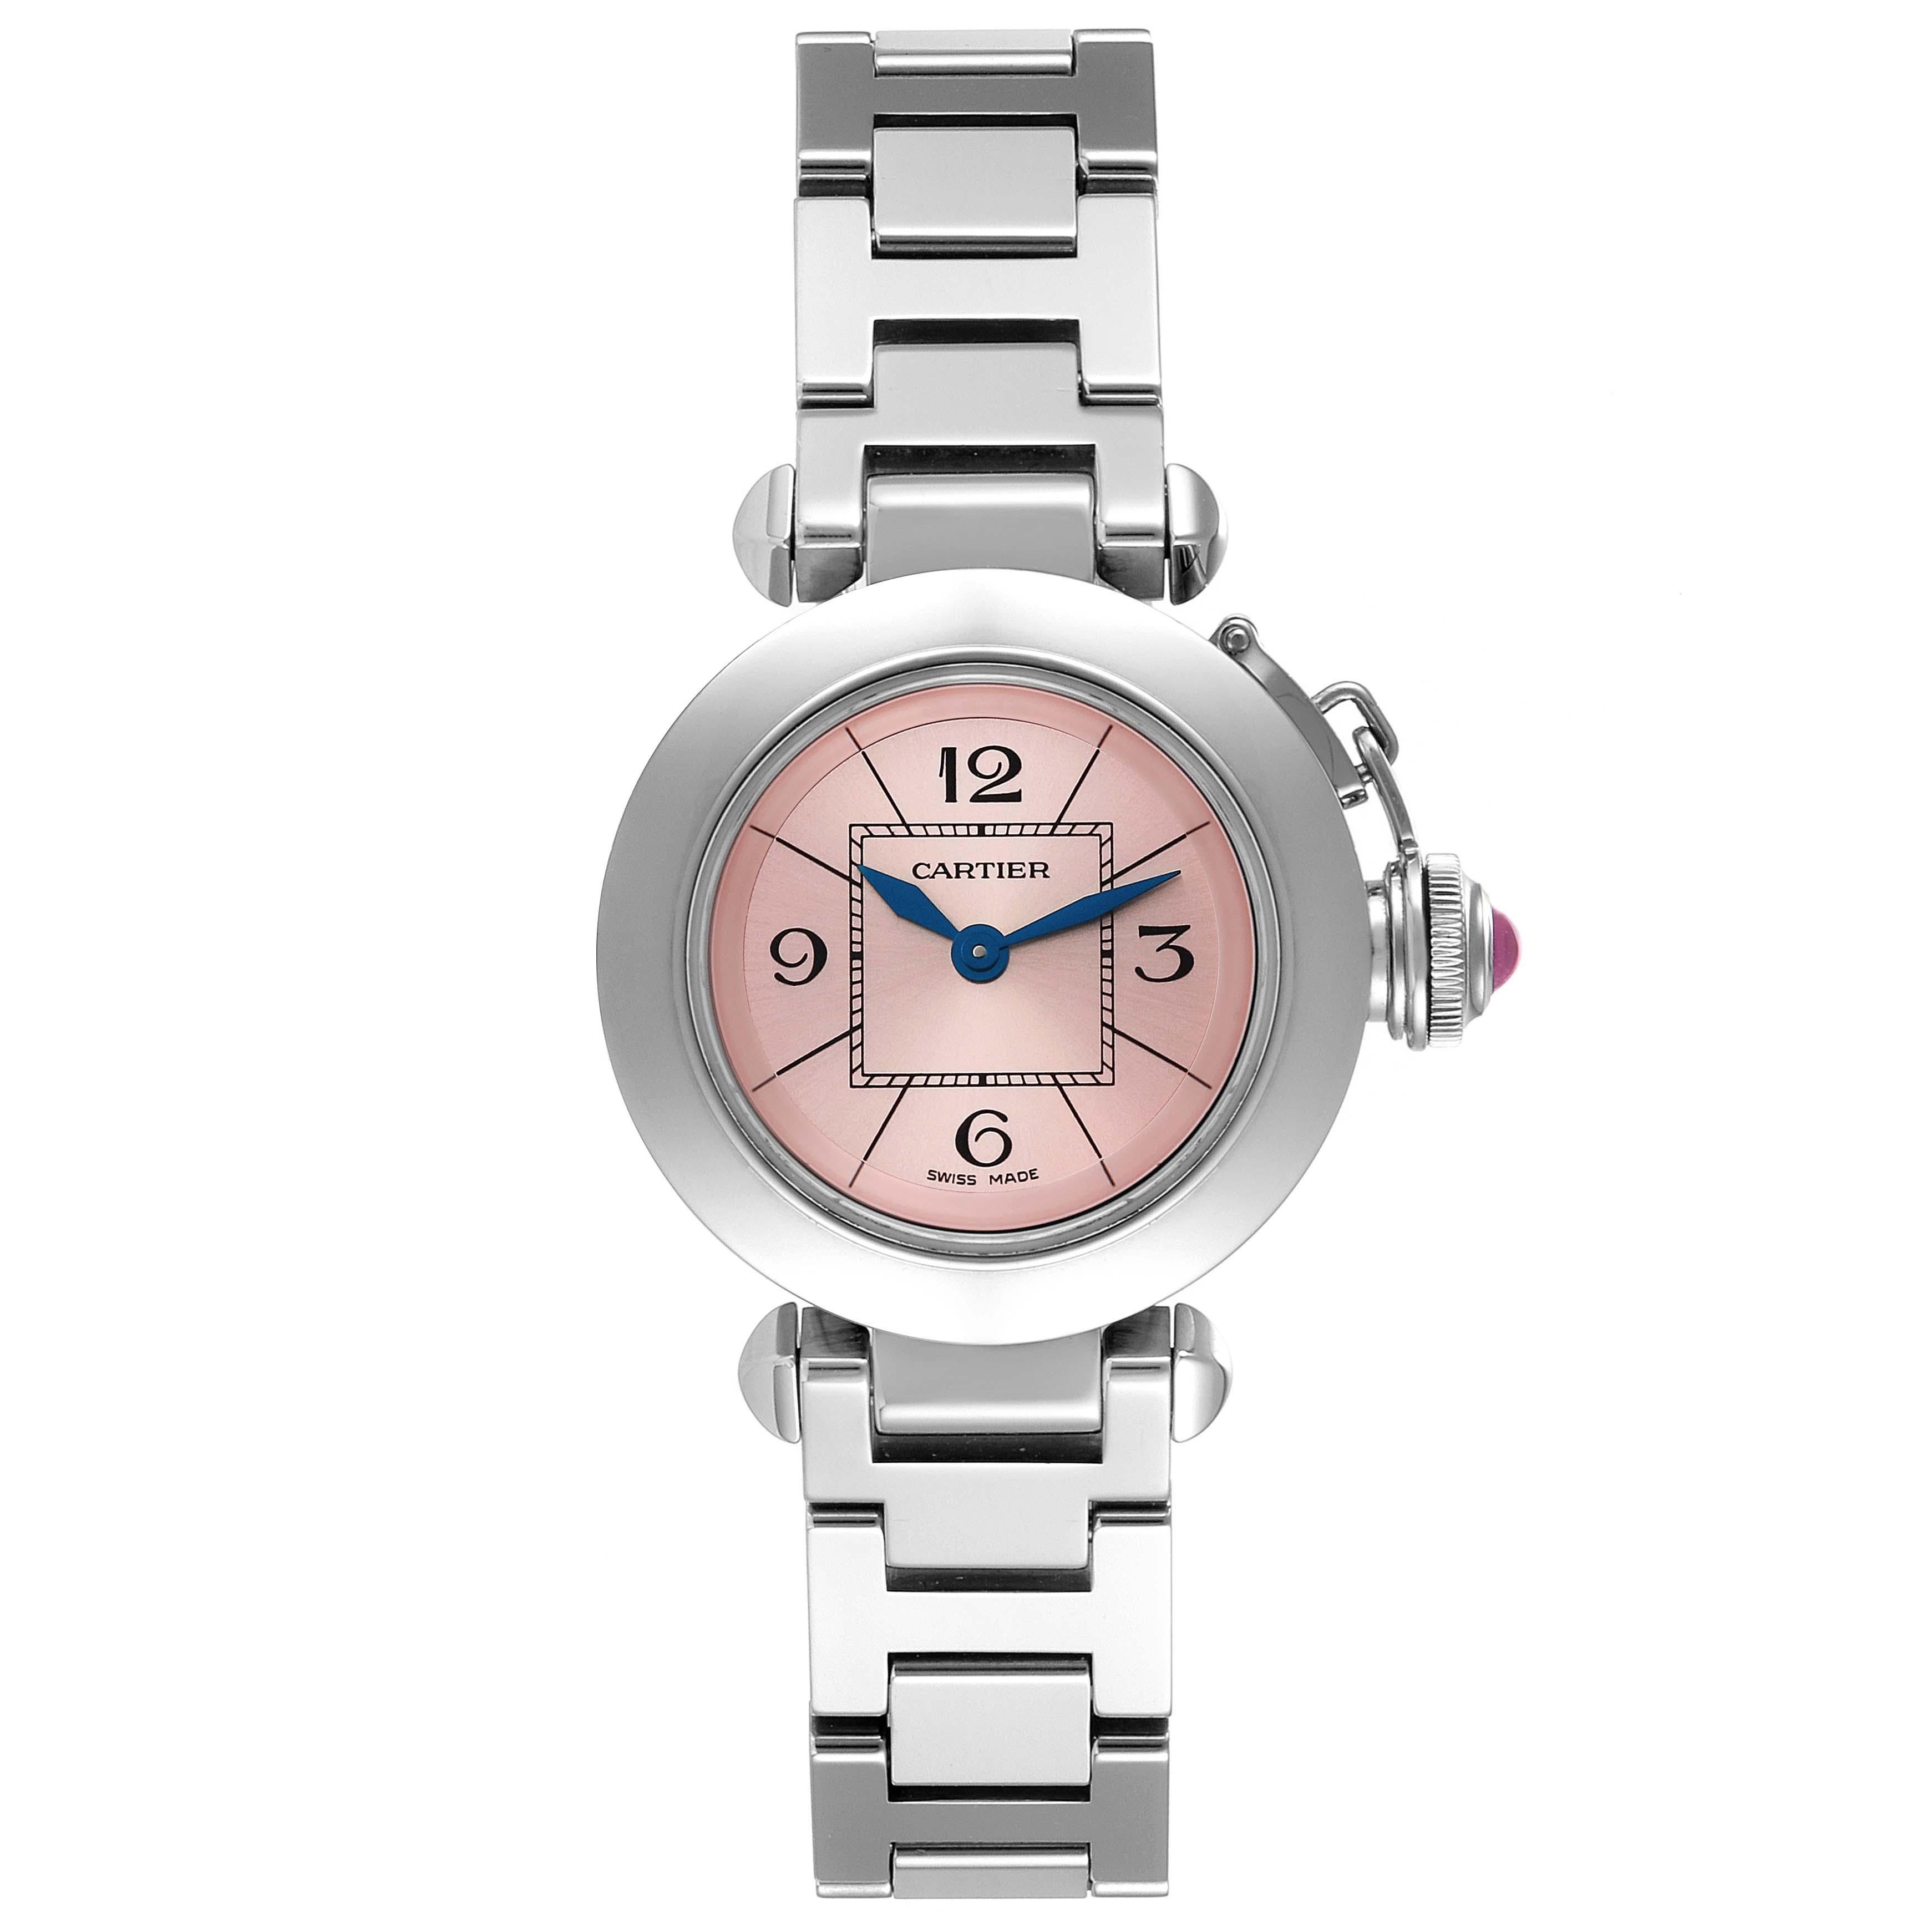 Cartier Miss Pasha Steel Pink Dial Ladies Watch W3140008 Box Papers. Quartz movement. Round polished and brushed stainless steel case 27.0 mm in diameter. Vendome lugs. Winding-crown protection cap set with a pink faceted cabochon. Concave stainless